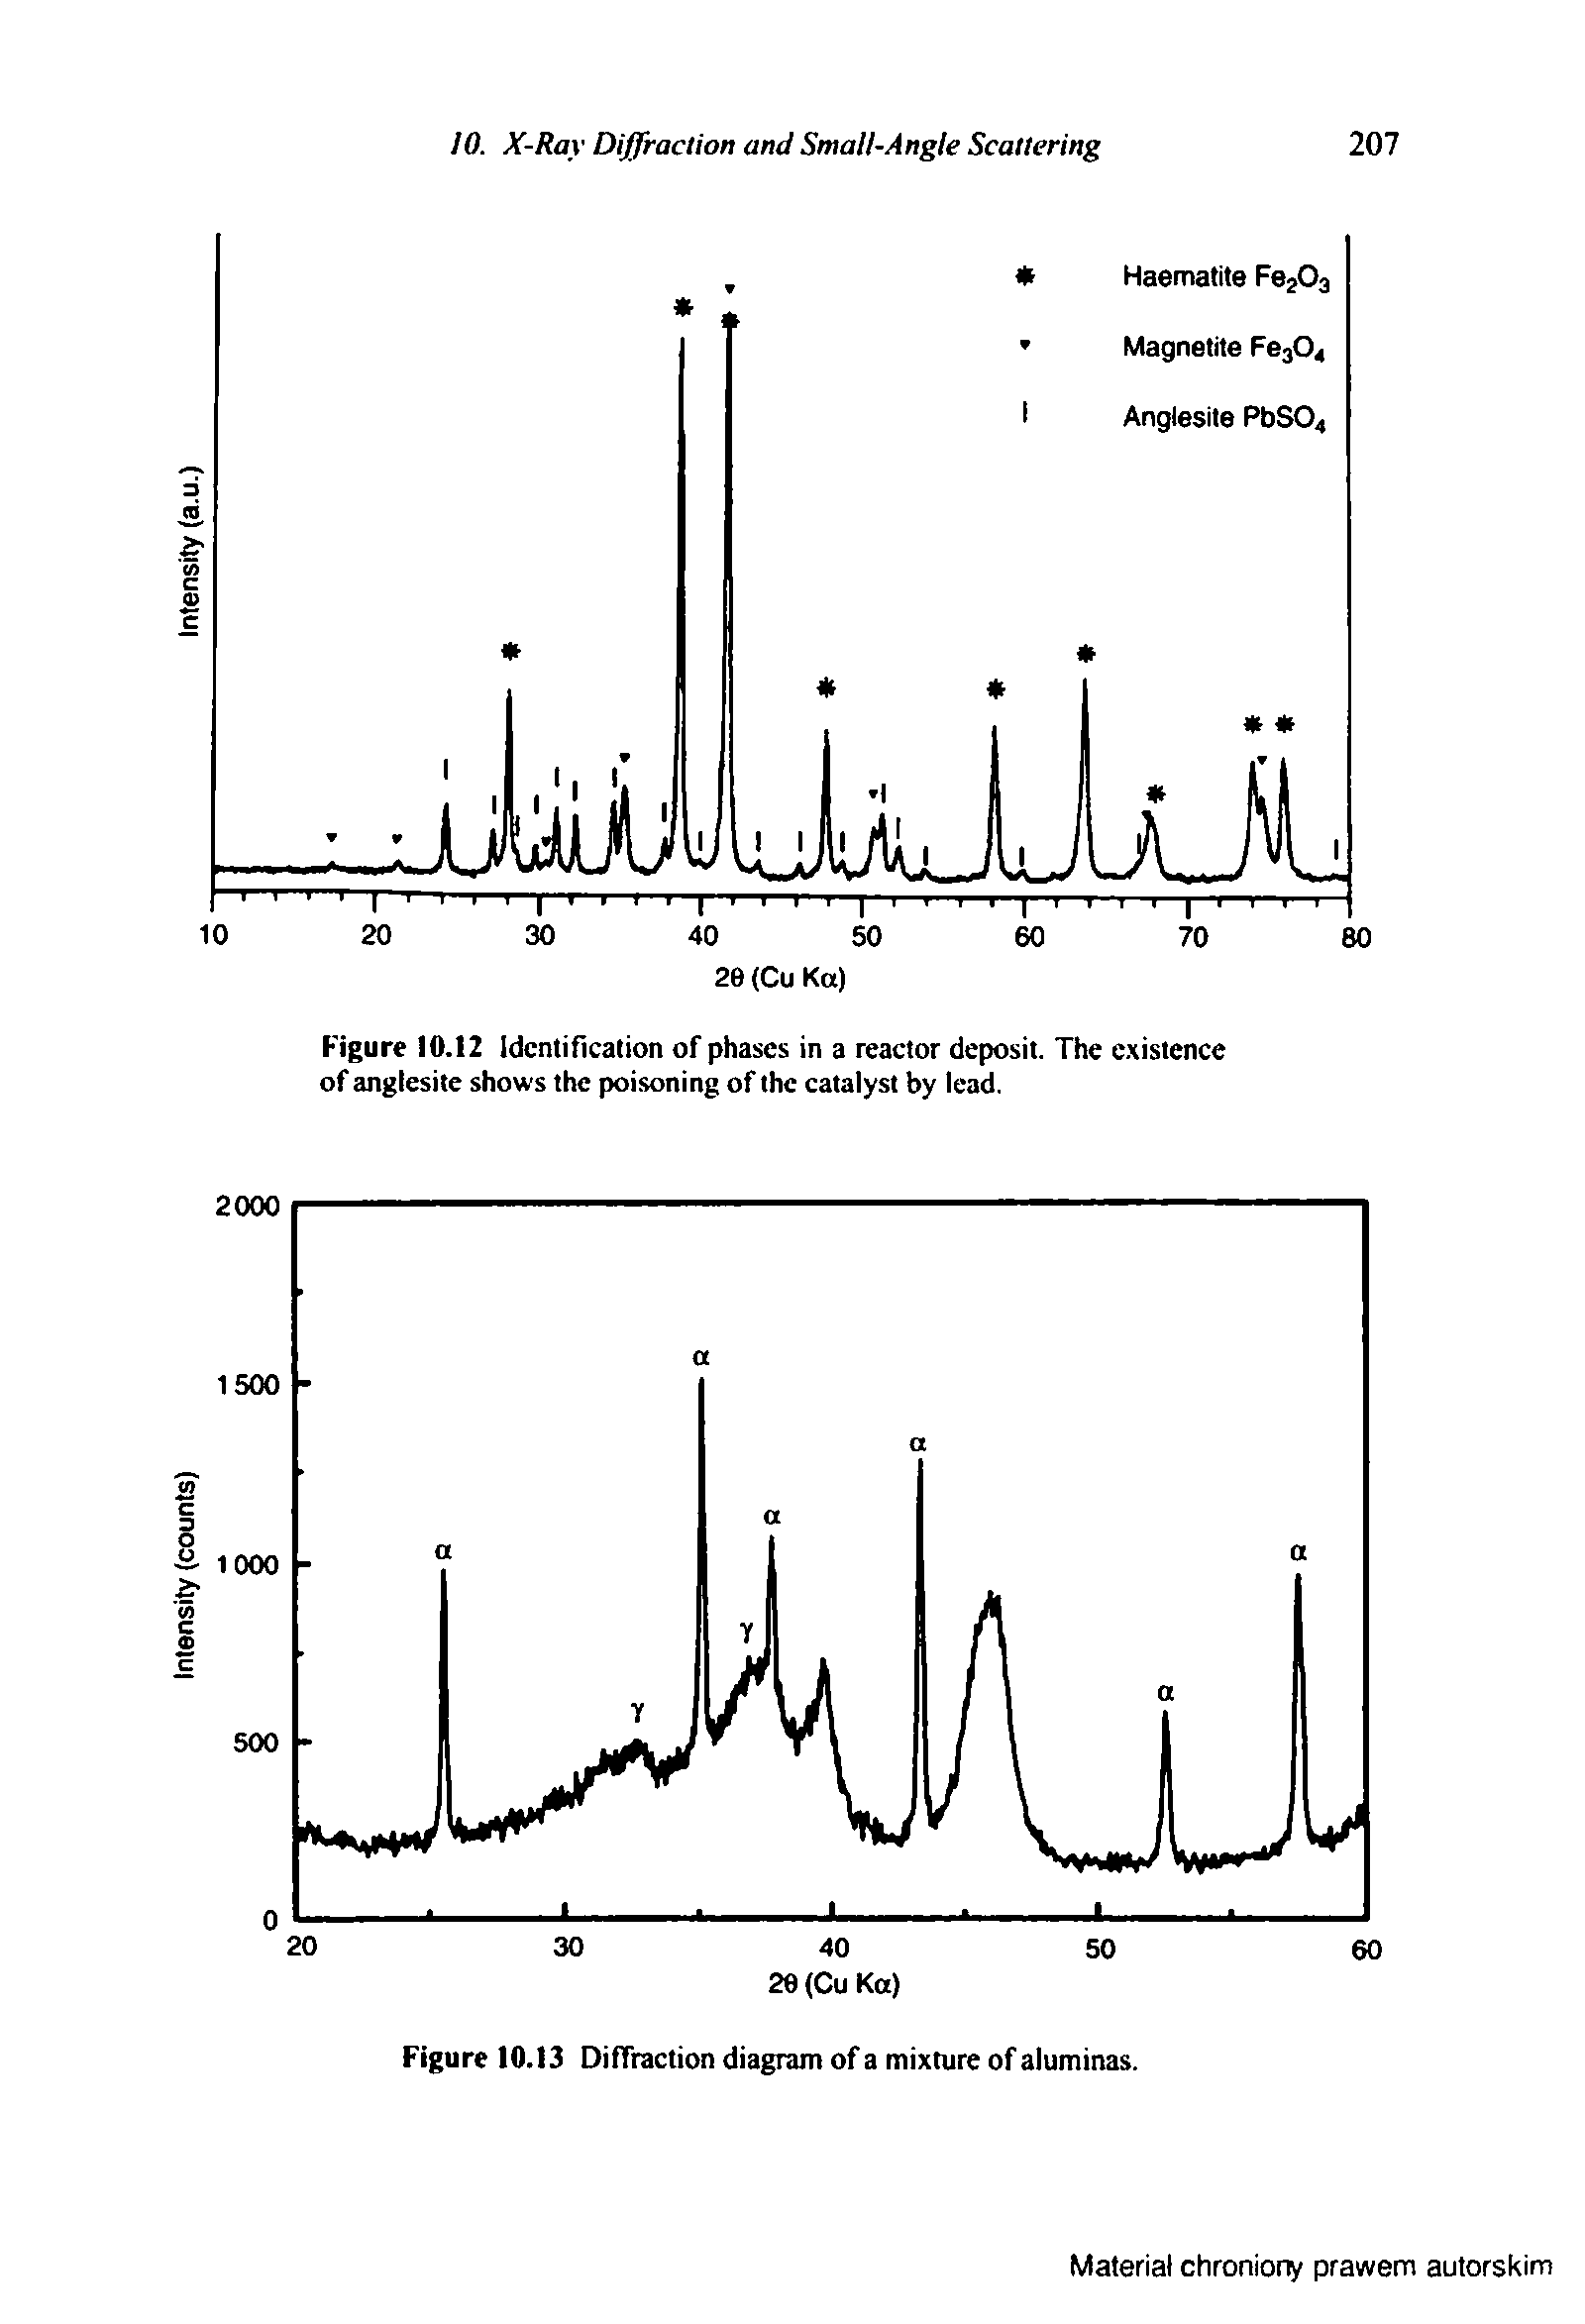 Figure 10.12 Identification of phases in a reactor deposit. The existence of anglesite shows the poisoning of the catalyst by lead.